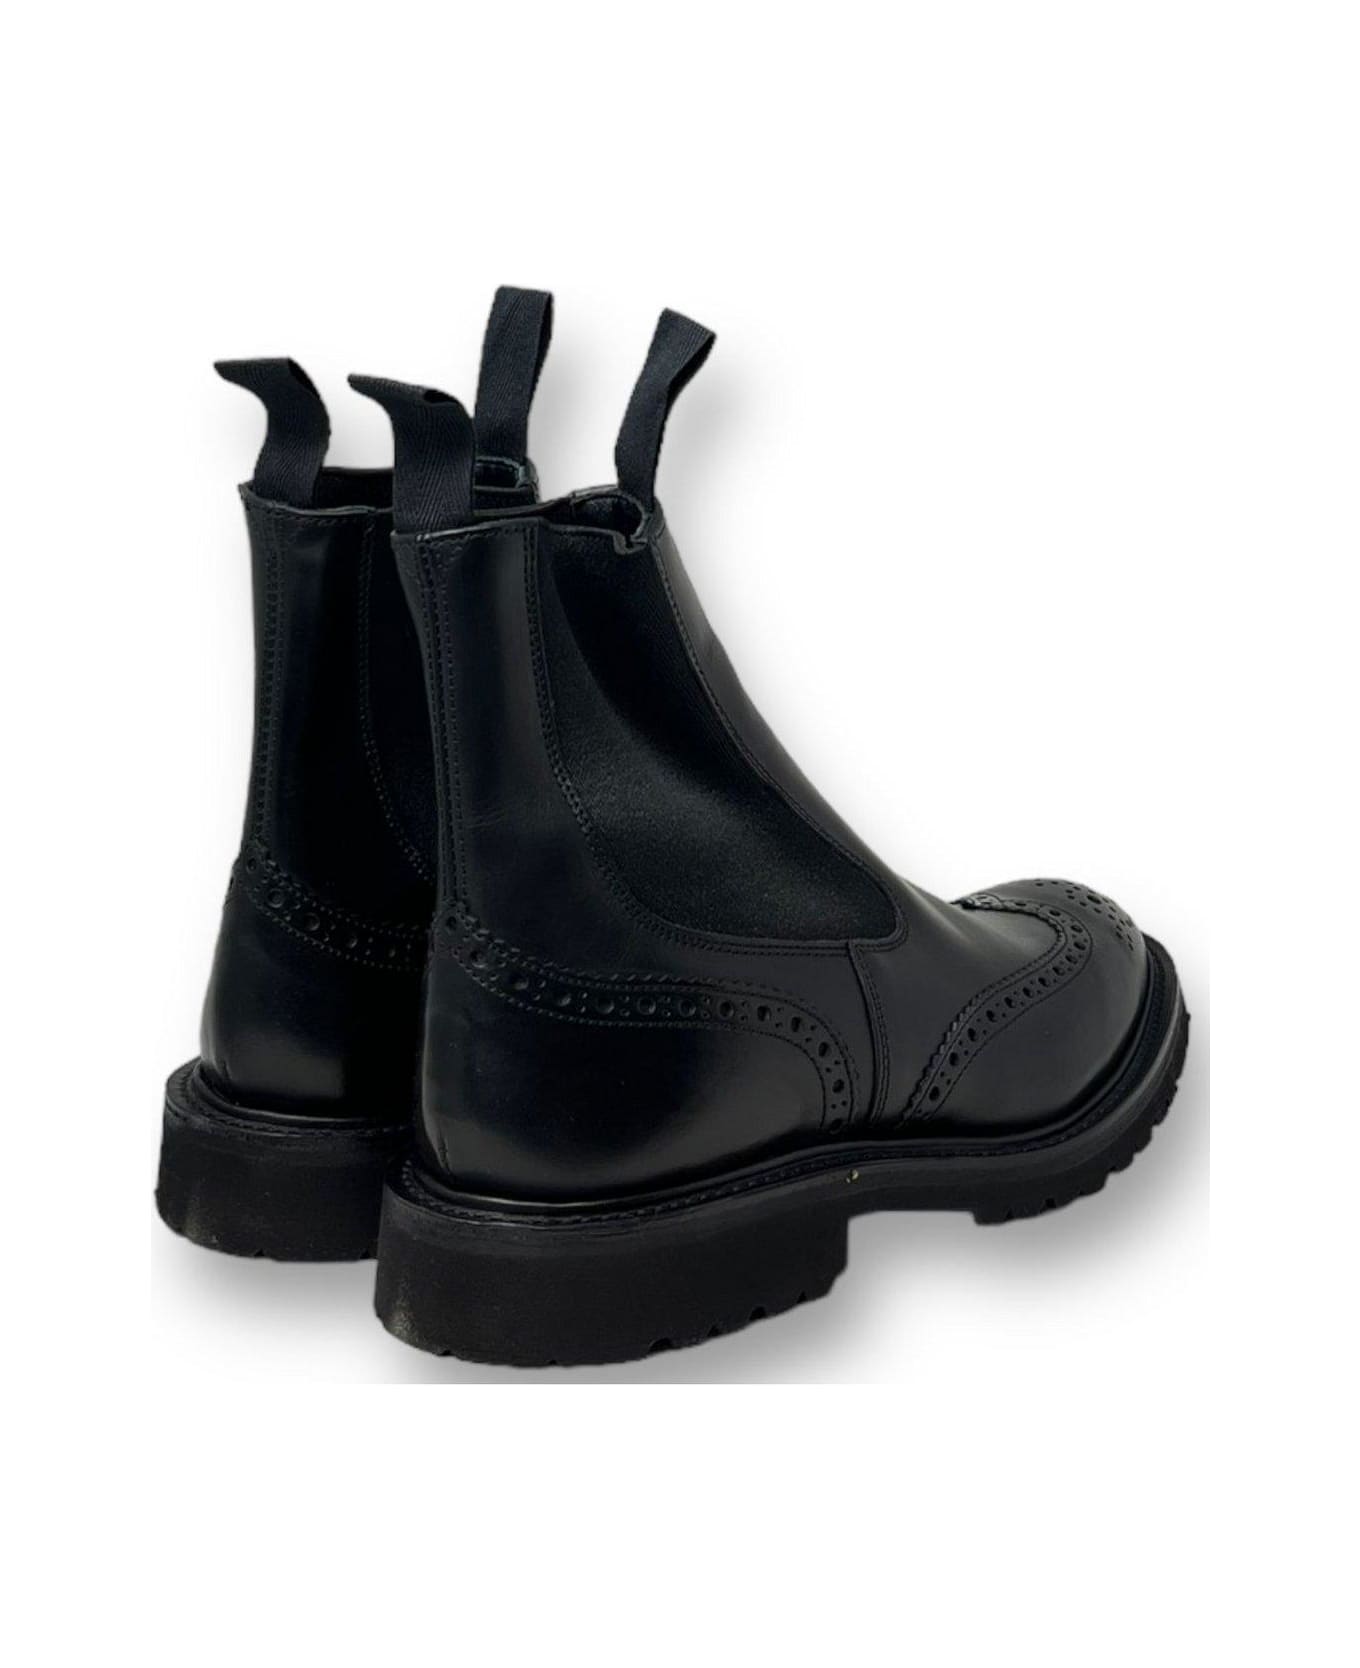 Tricker's Henry Ankle Chelsea Boot Boots - BLACK